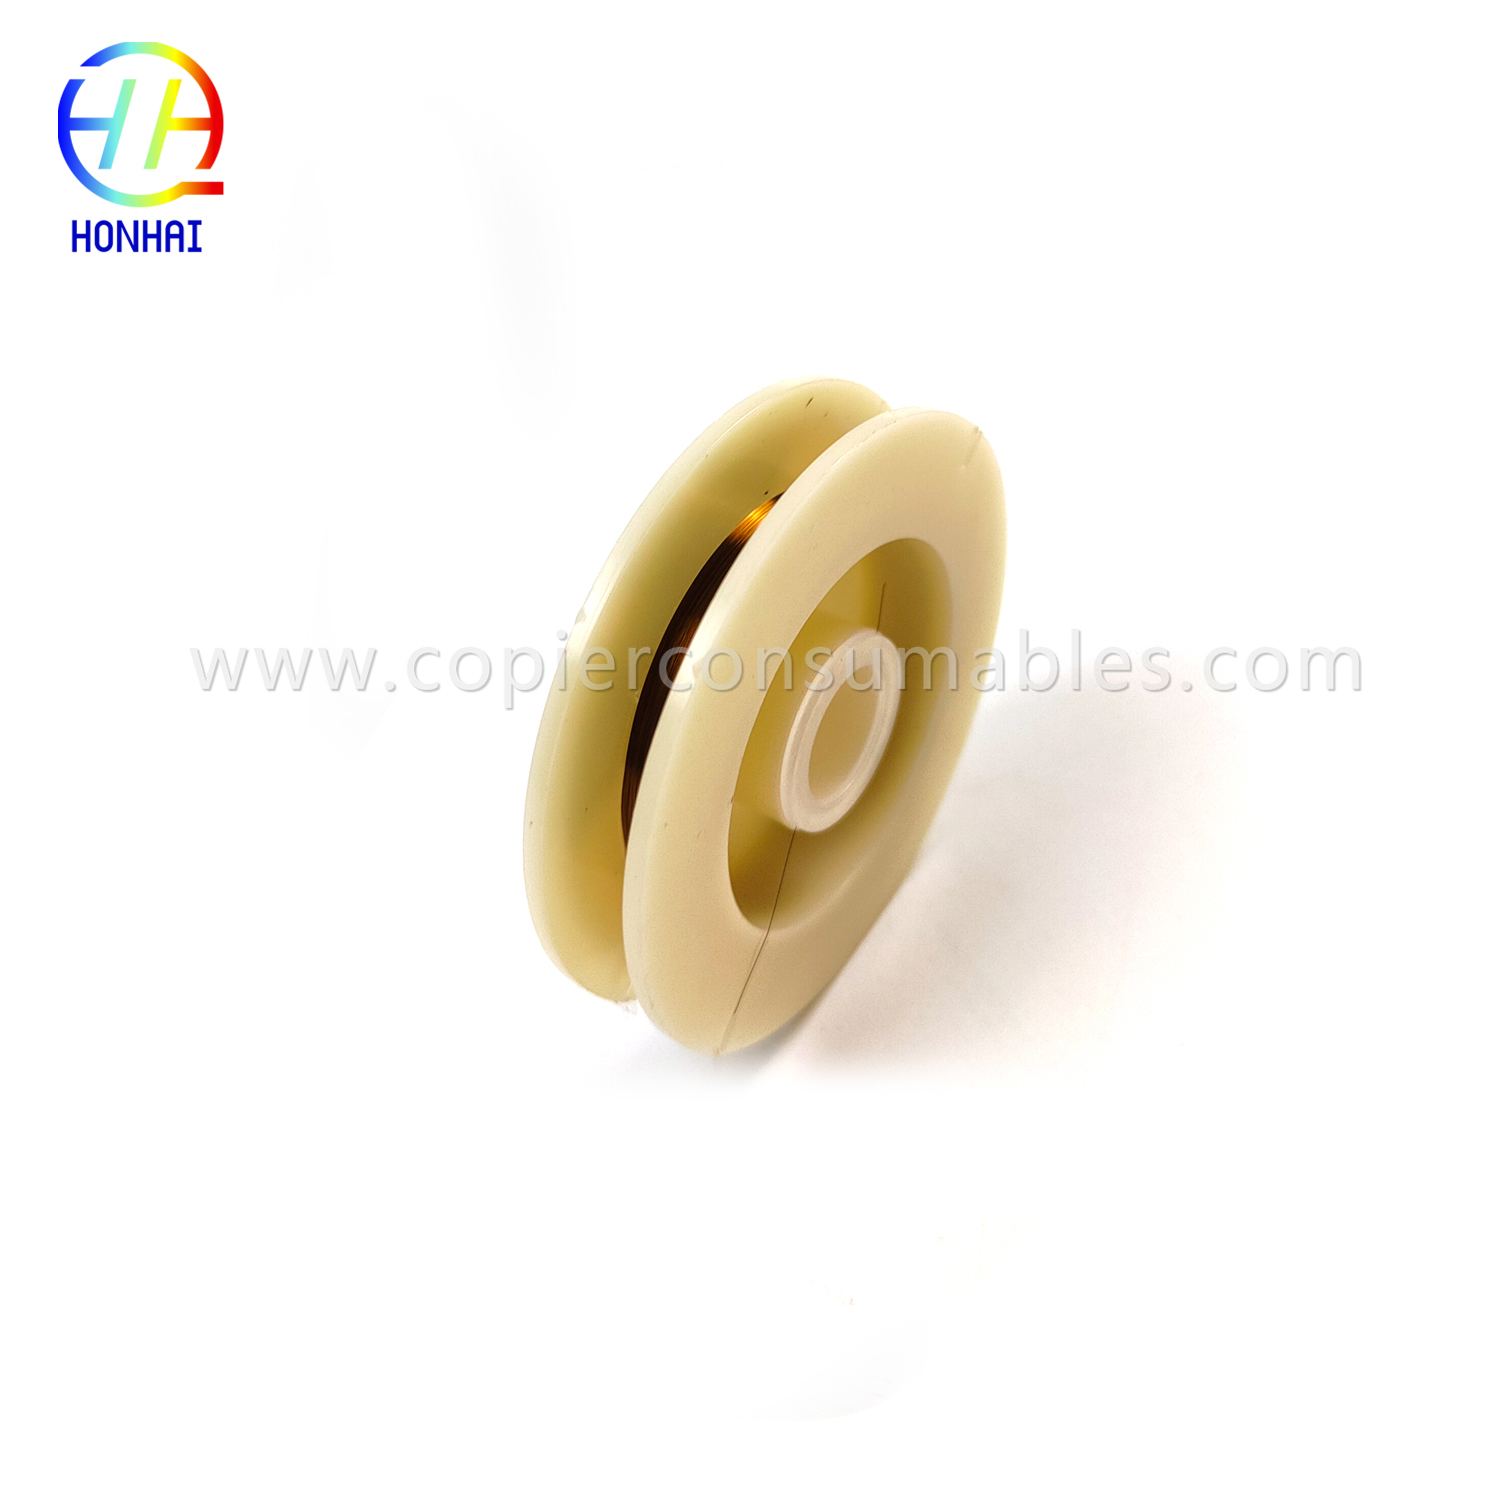 https://www.copierconsumables.com/wire-electrode-for-canon-ir5000-6275-8205-6075-8105-8505-8295-6575-ምርት/